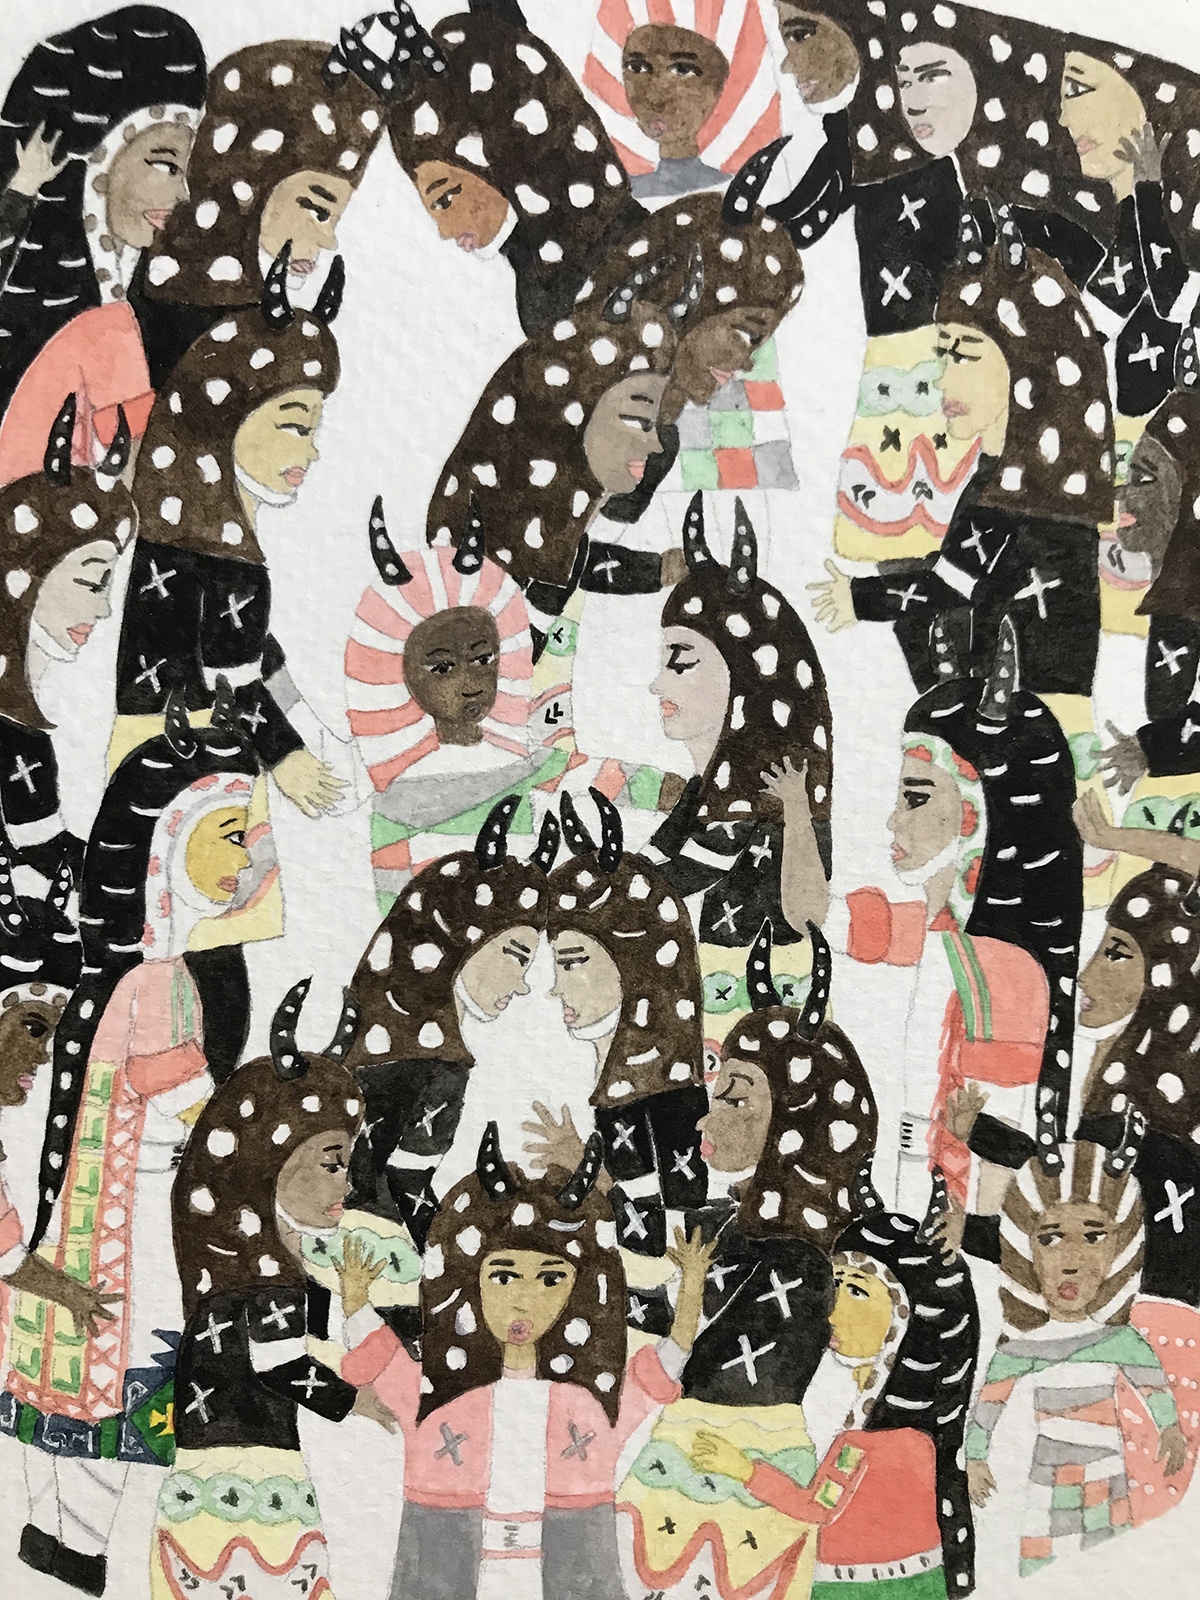 Detail of Artwork by Kyung Jeon titled Vessel of Marchers, 2020, Watercolor on paper, 14 x 11 inches, 35.56 x 27.94 cm